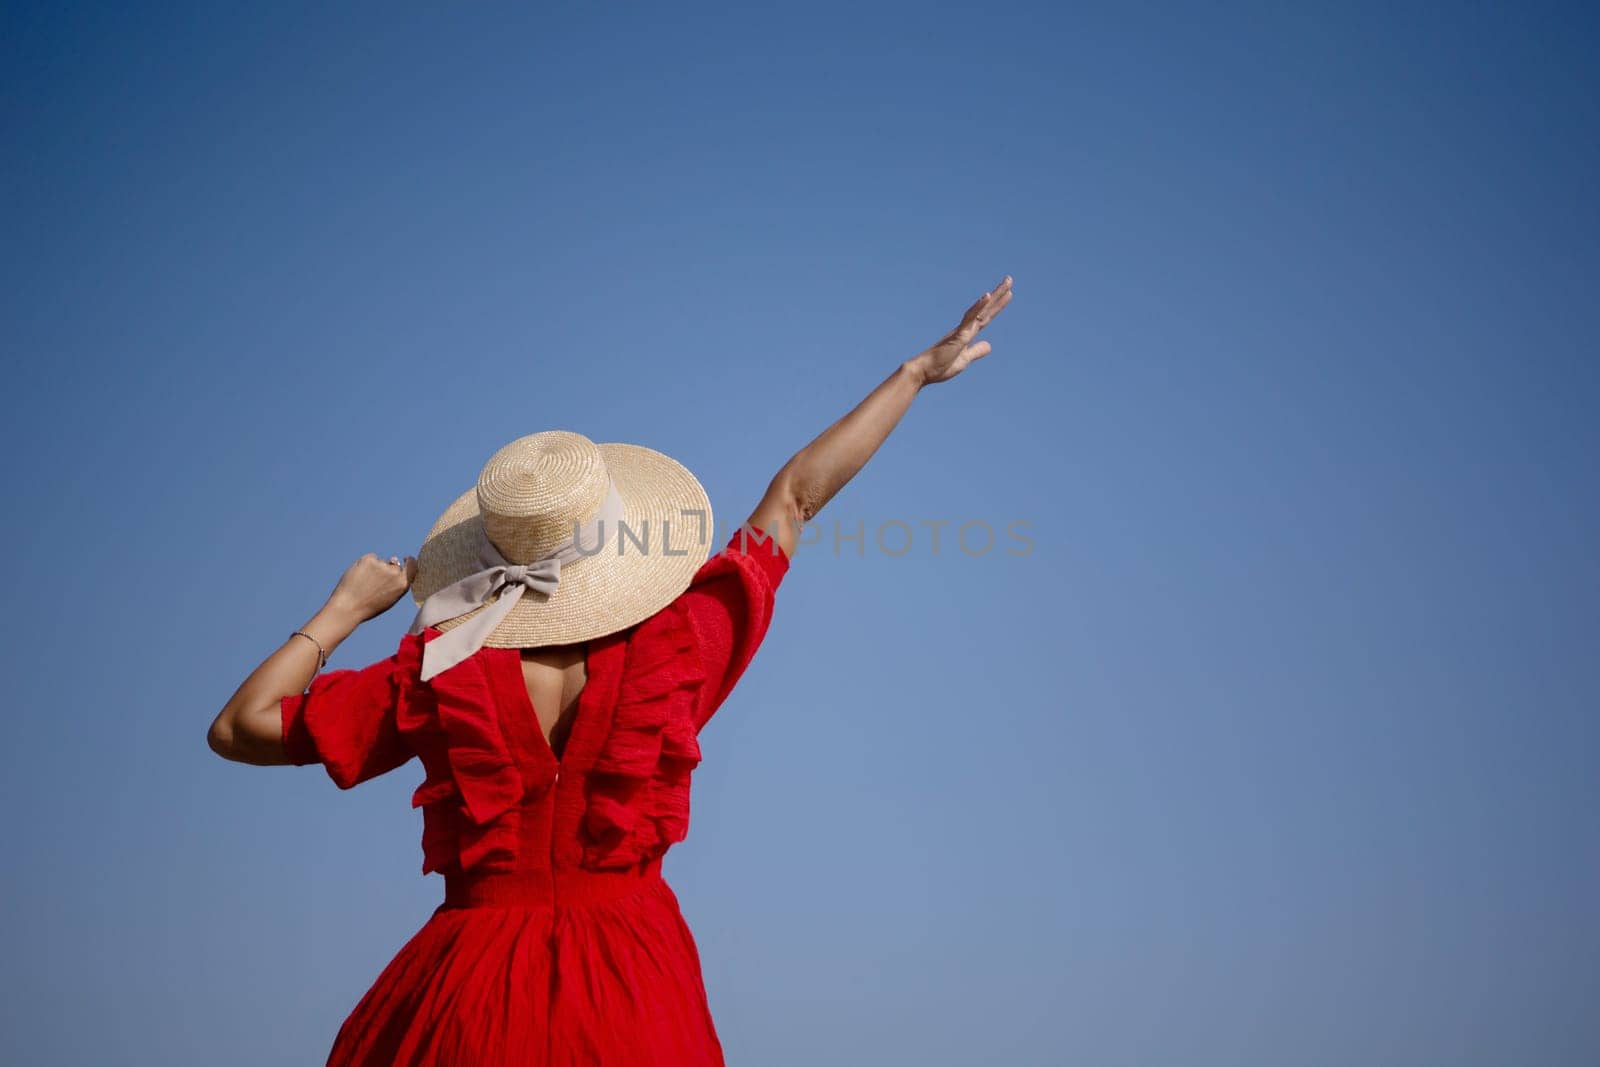 A woman in a red dress is standing in the sun with a straw hat on. She is waving her hand in the air